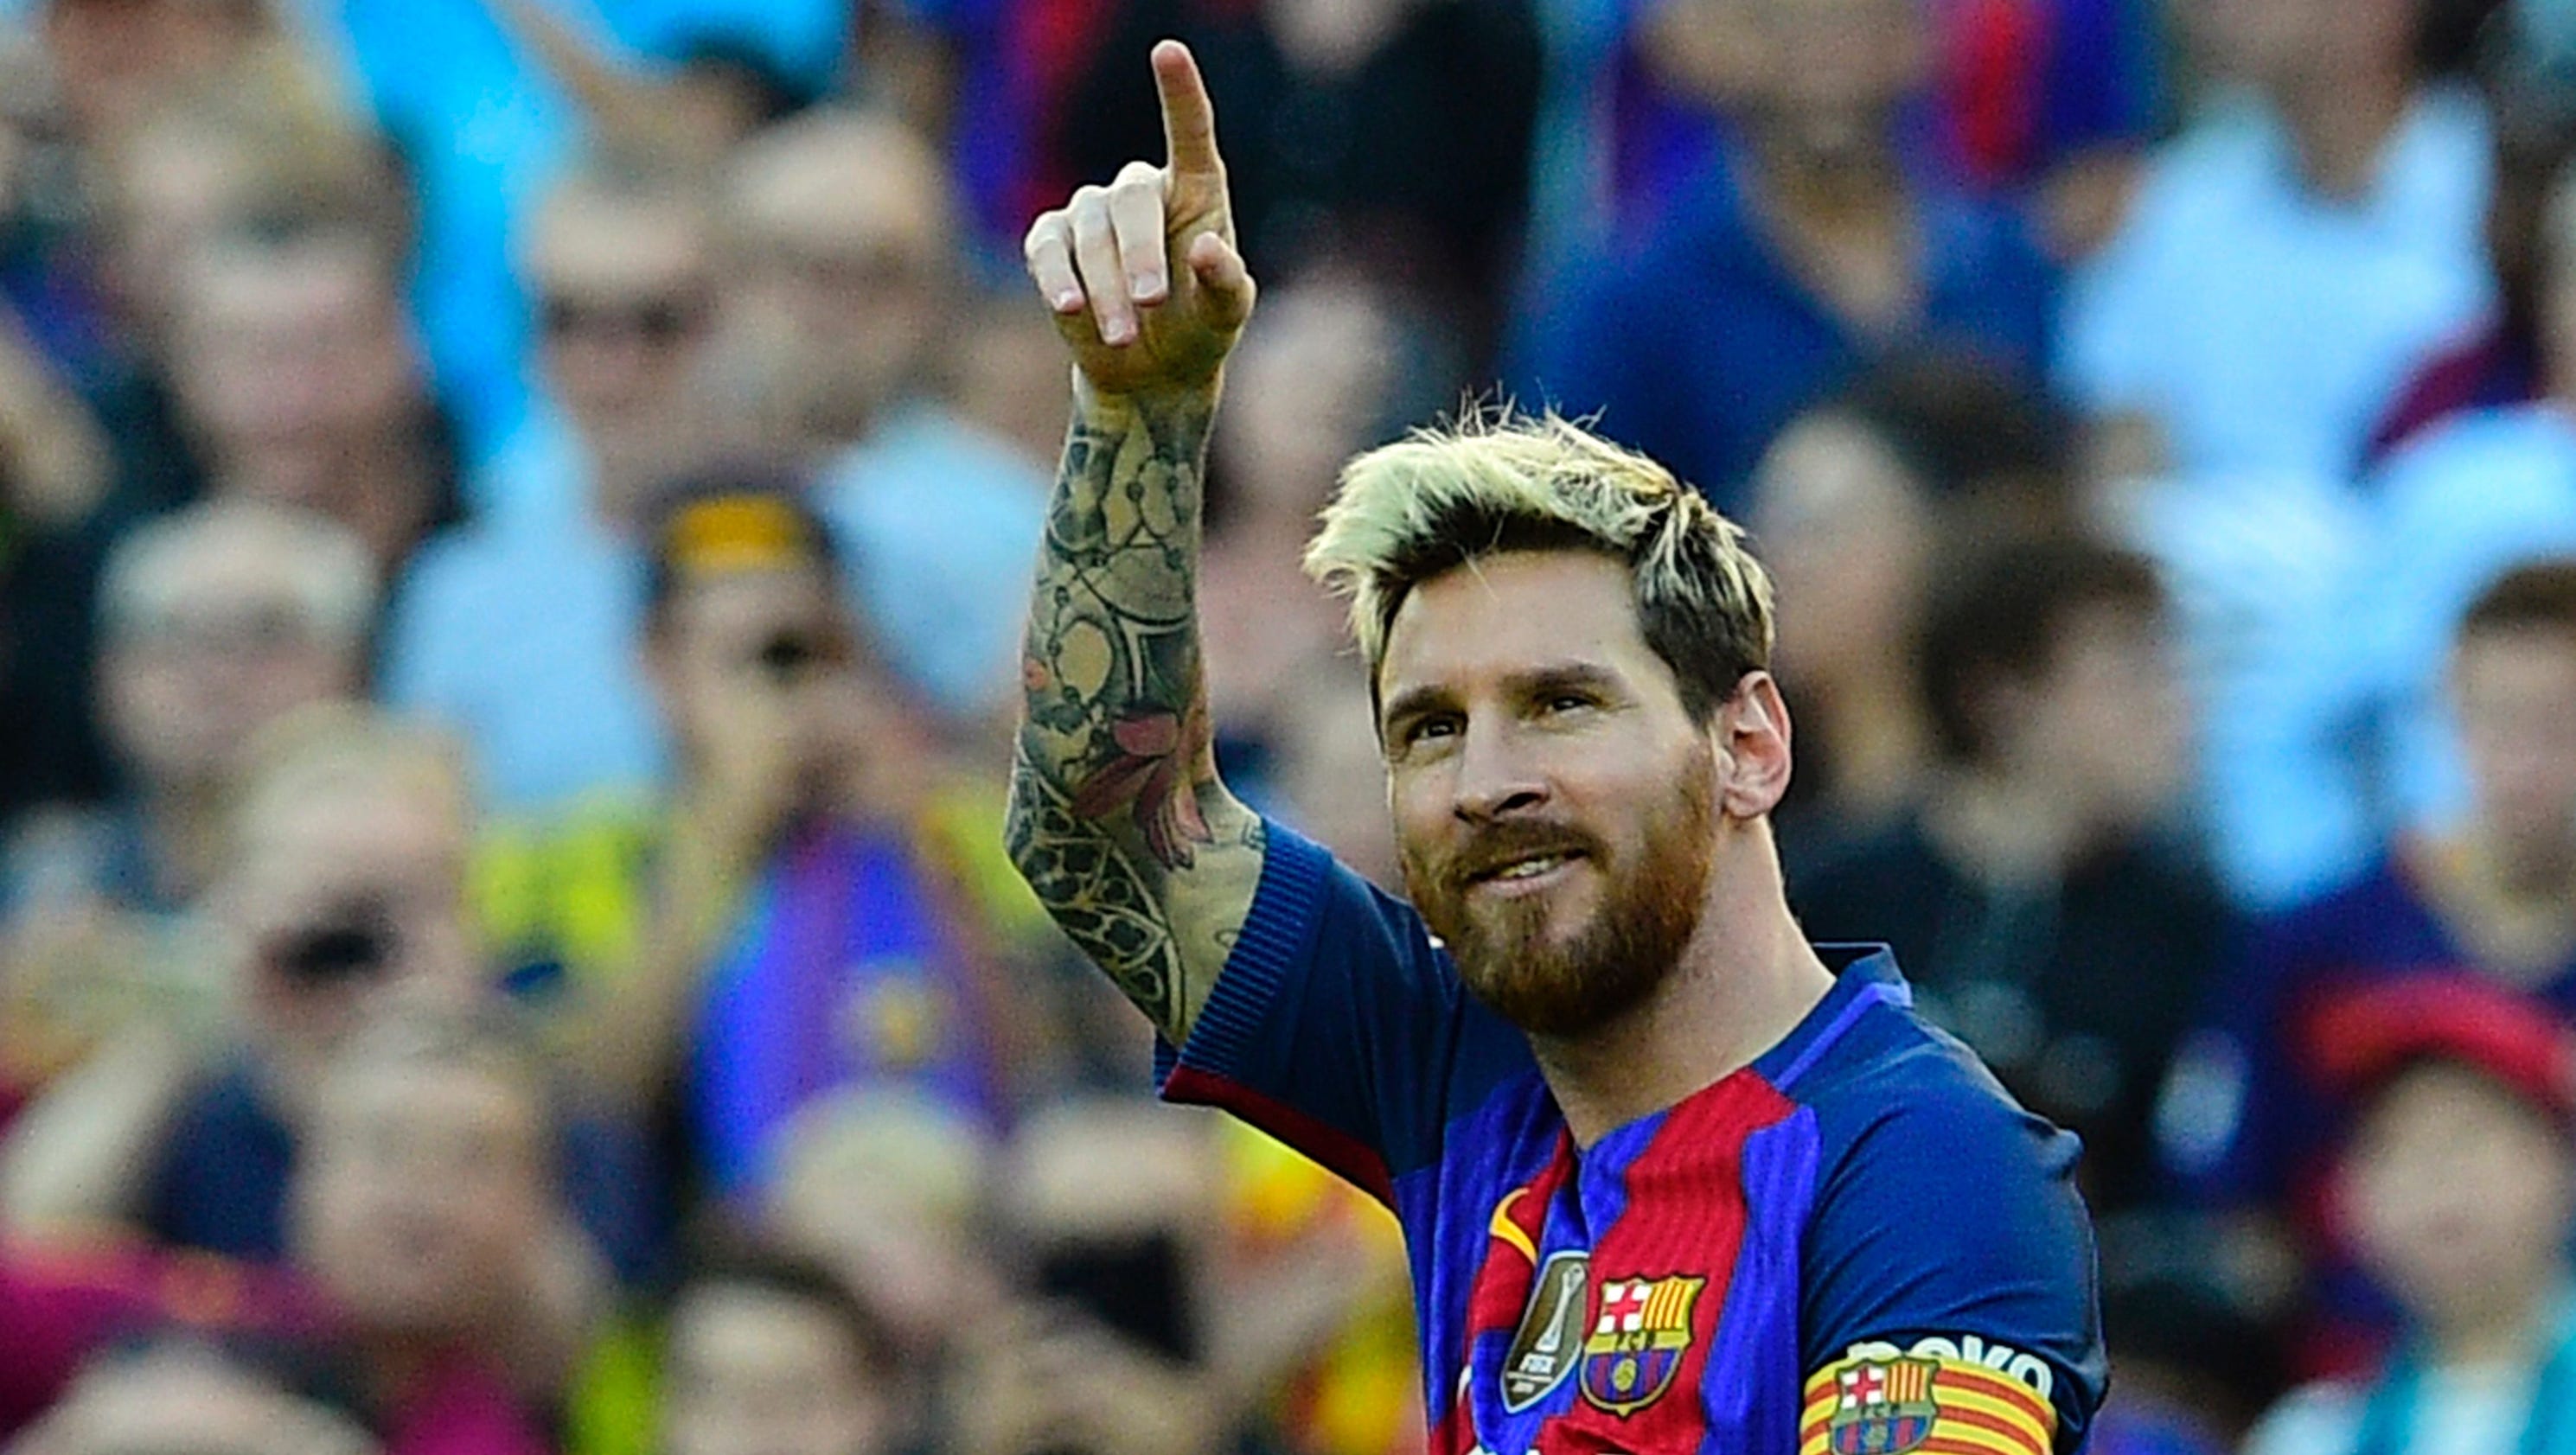 Barcelona's Leo Messi scores with third touch on successful injury return